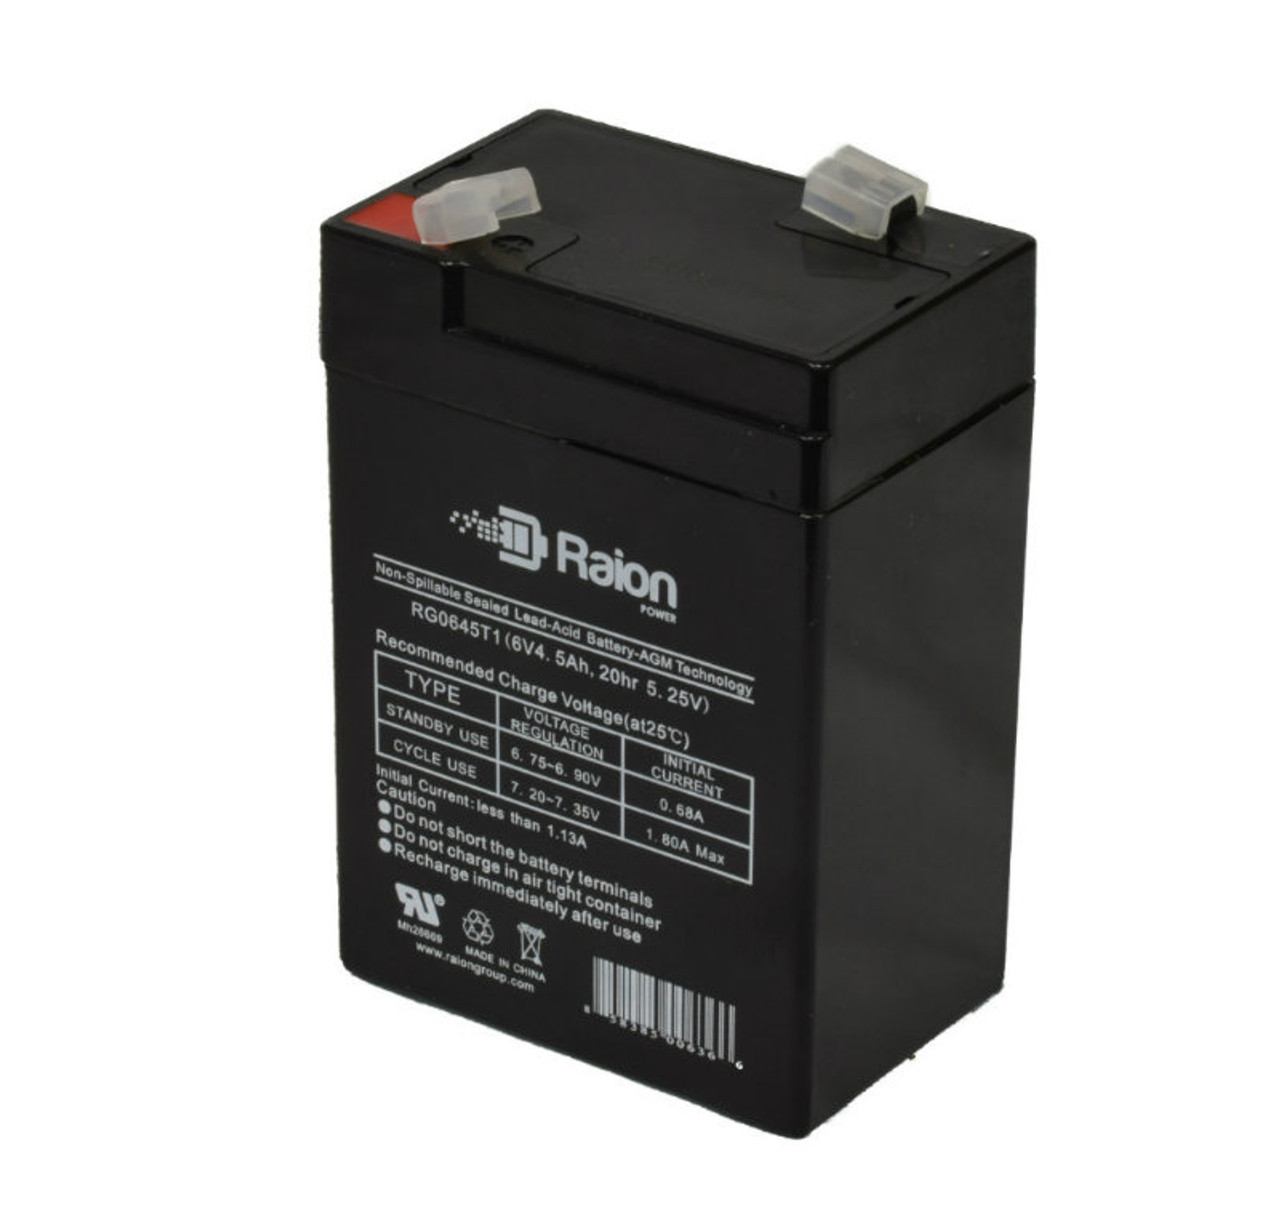 Raion Power RG0645T1 6V 4.5Ah Replacement Battery Cartridge for Gaston GT6-4.5